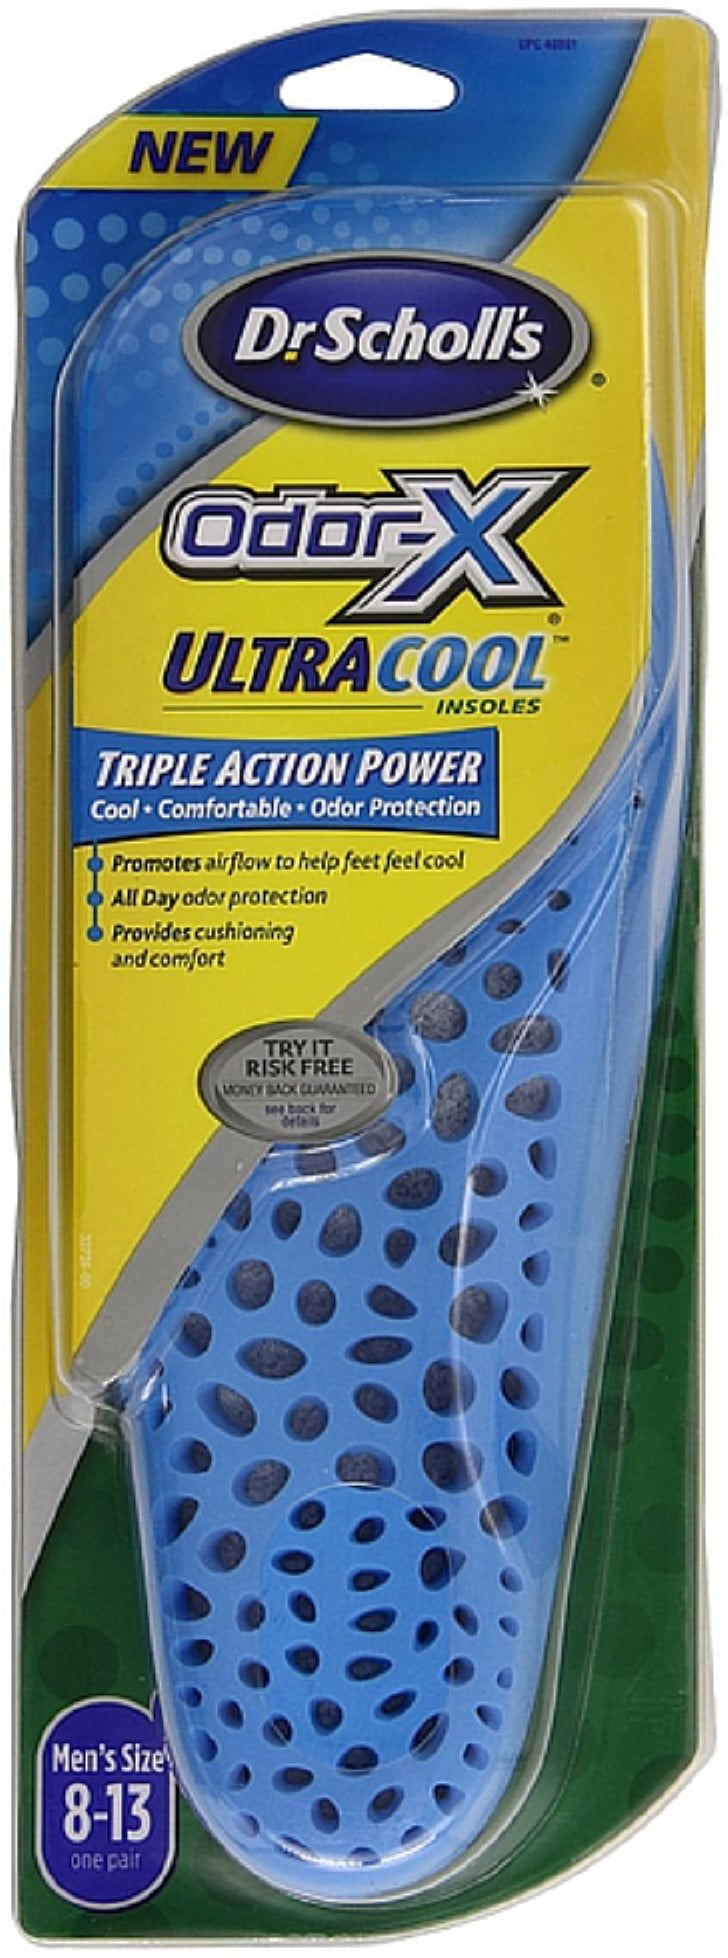 Odor-X UltraCool Insoles, Men Sizes 